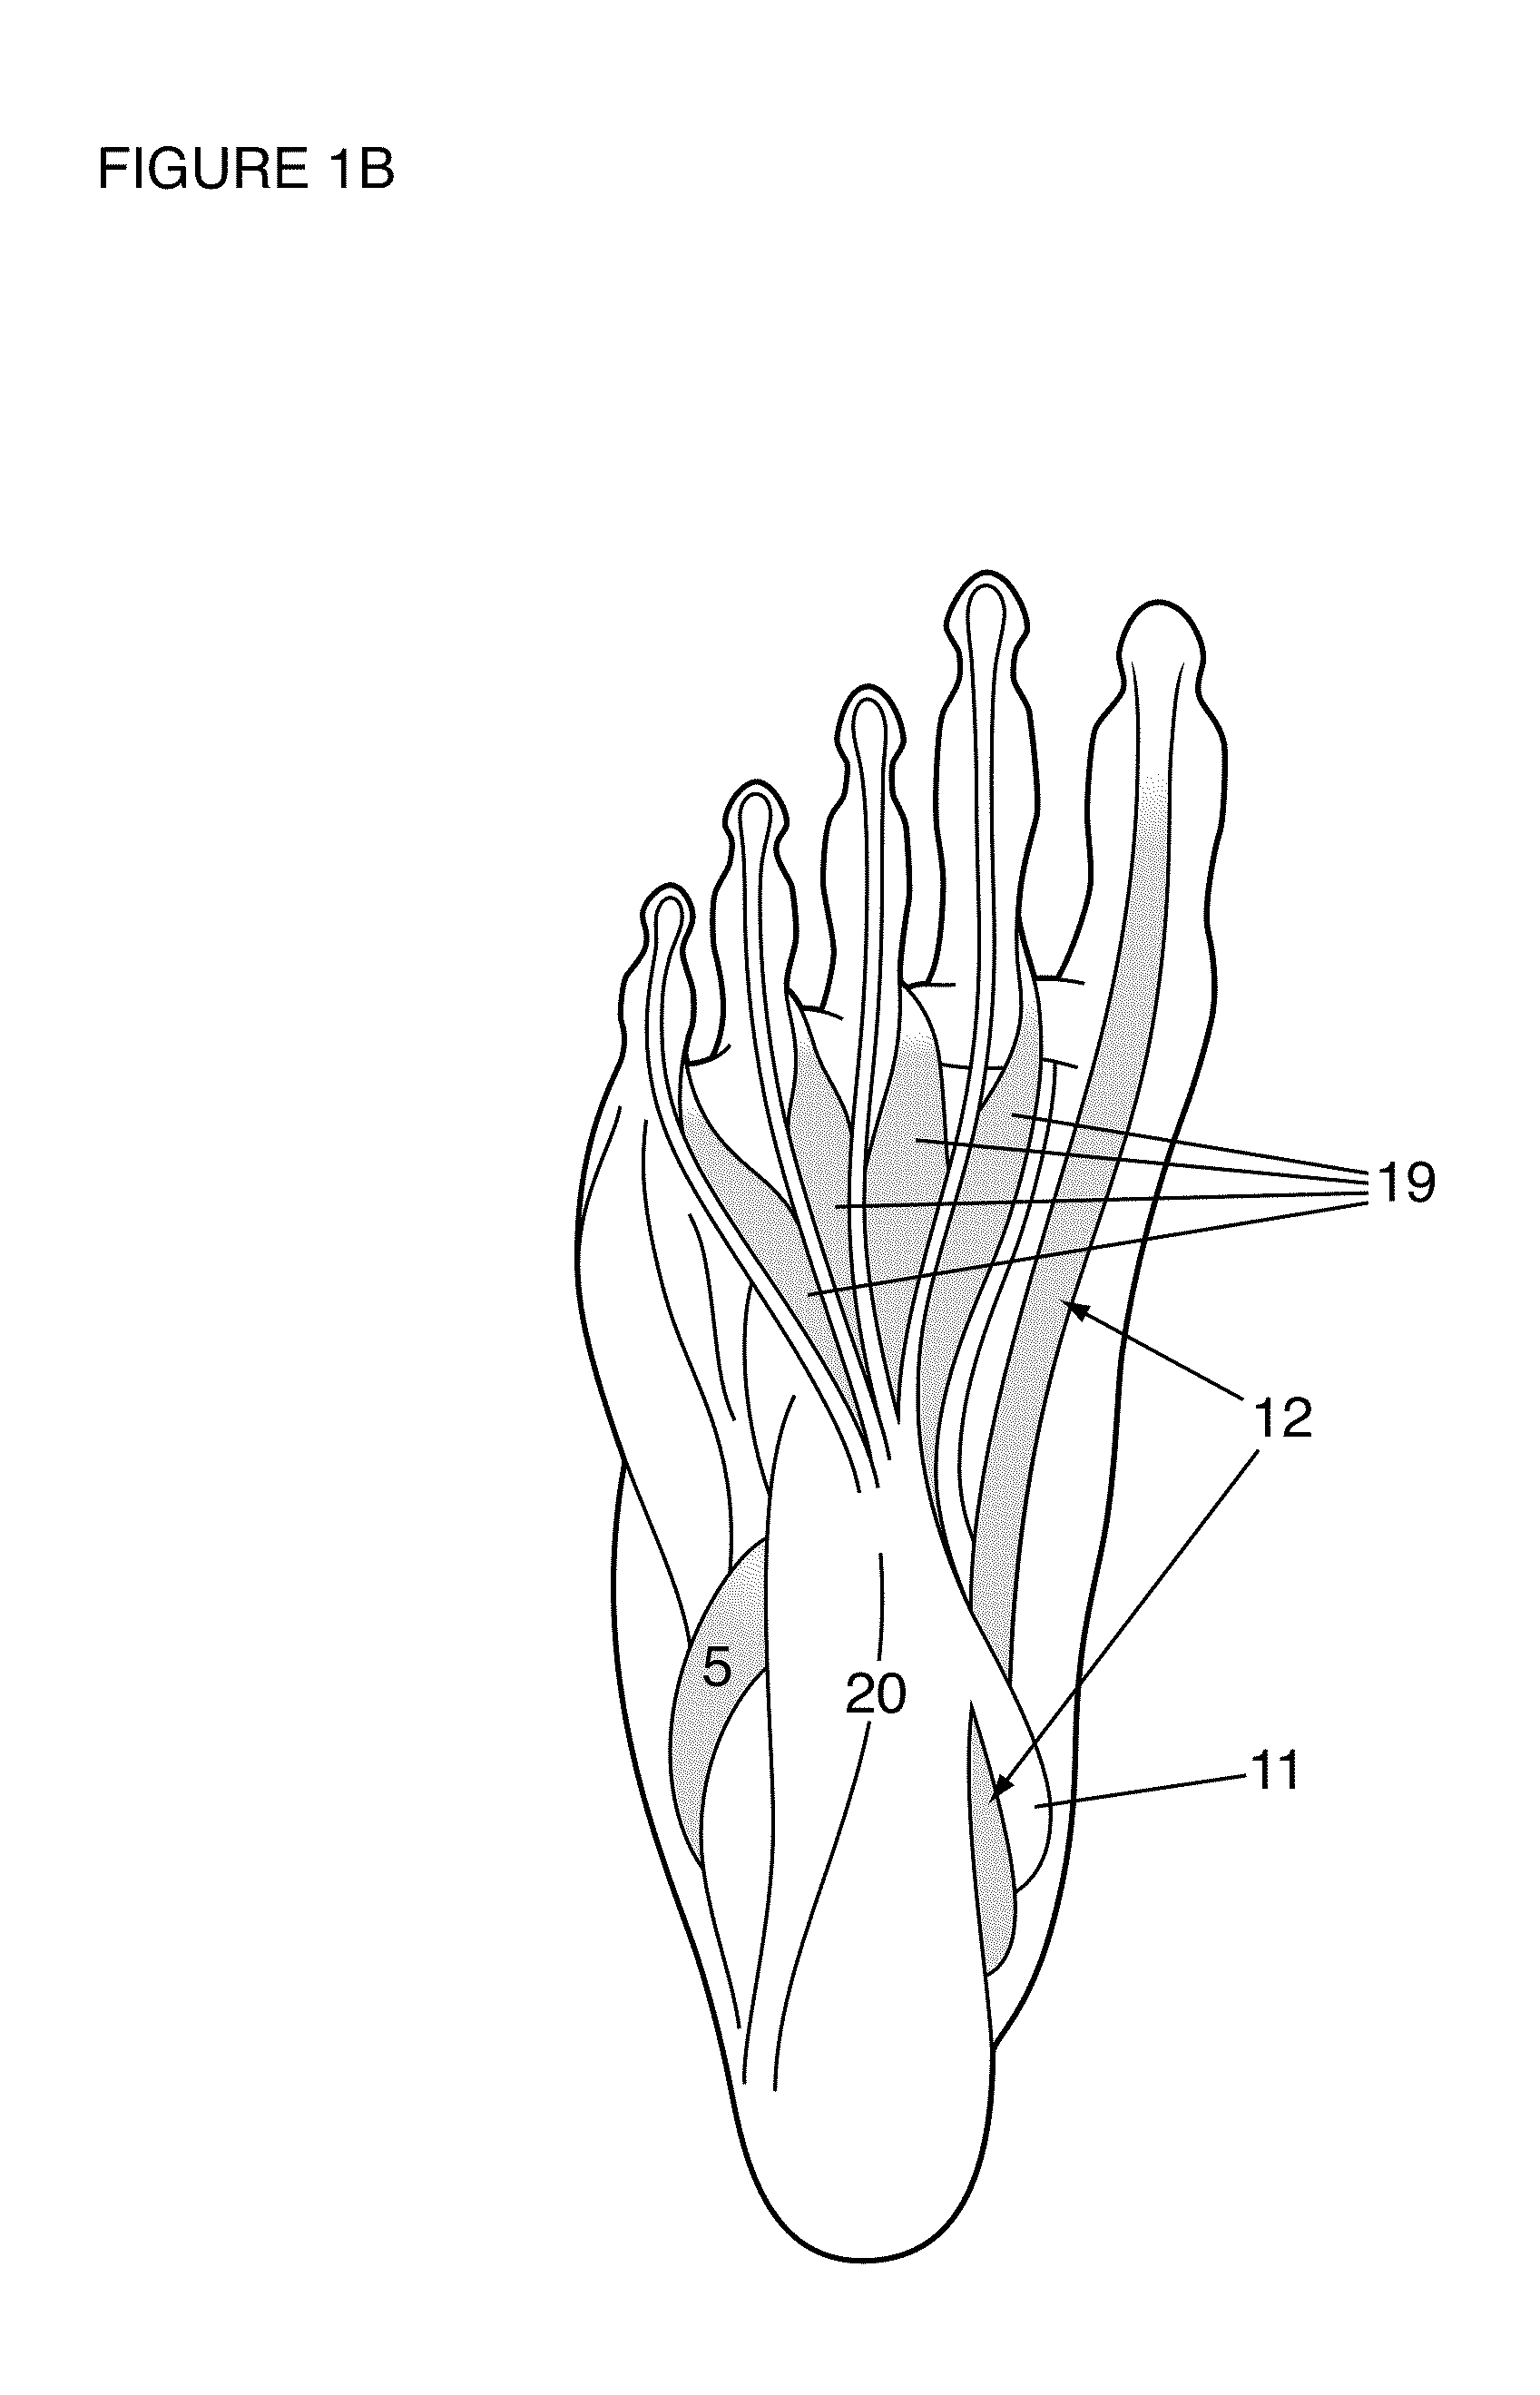 Programmable electrical stimulation of the foot muscles